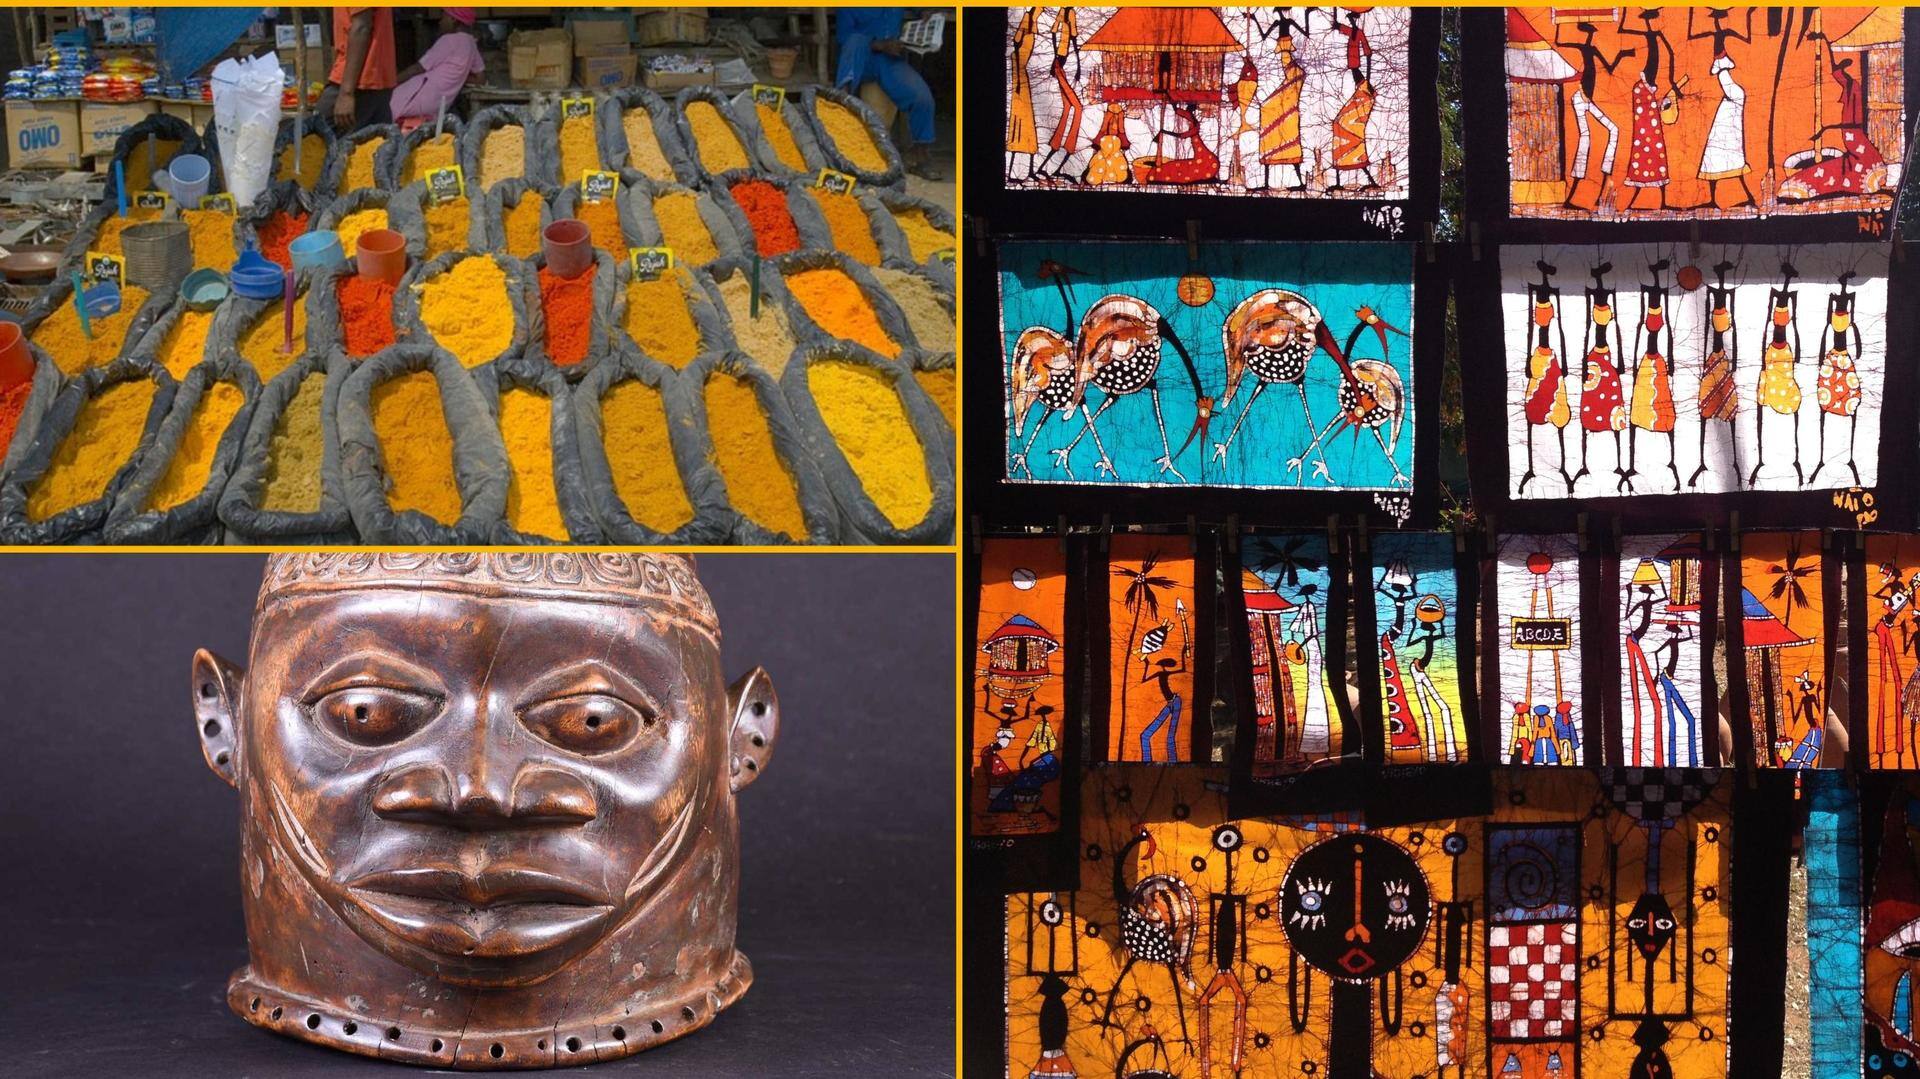 Souvenirs from Mozambique to buy on your shopping spree